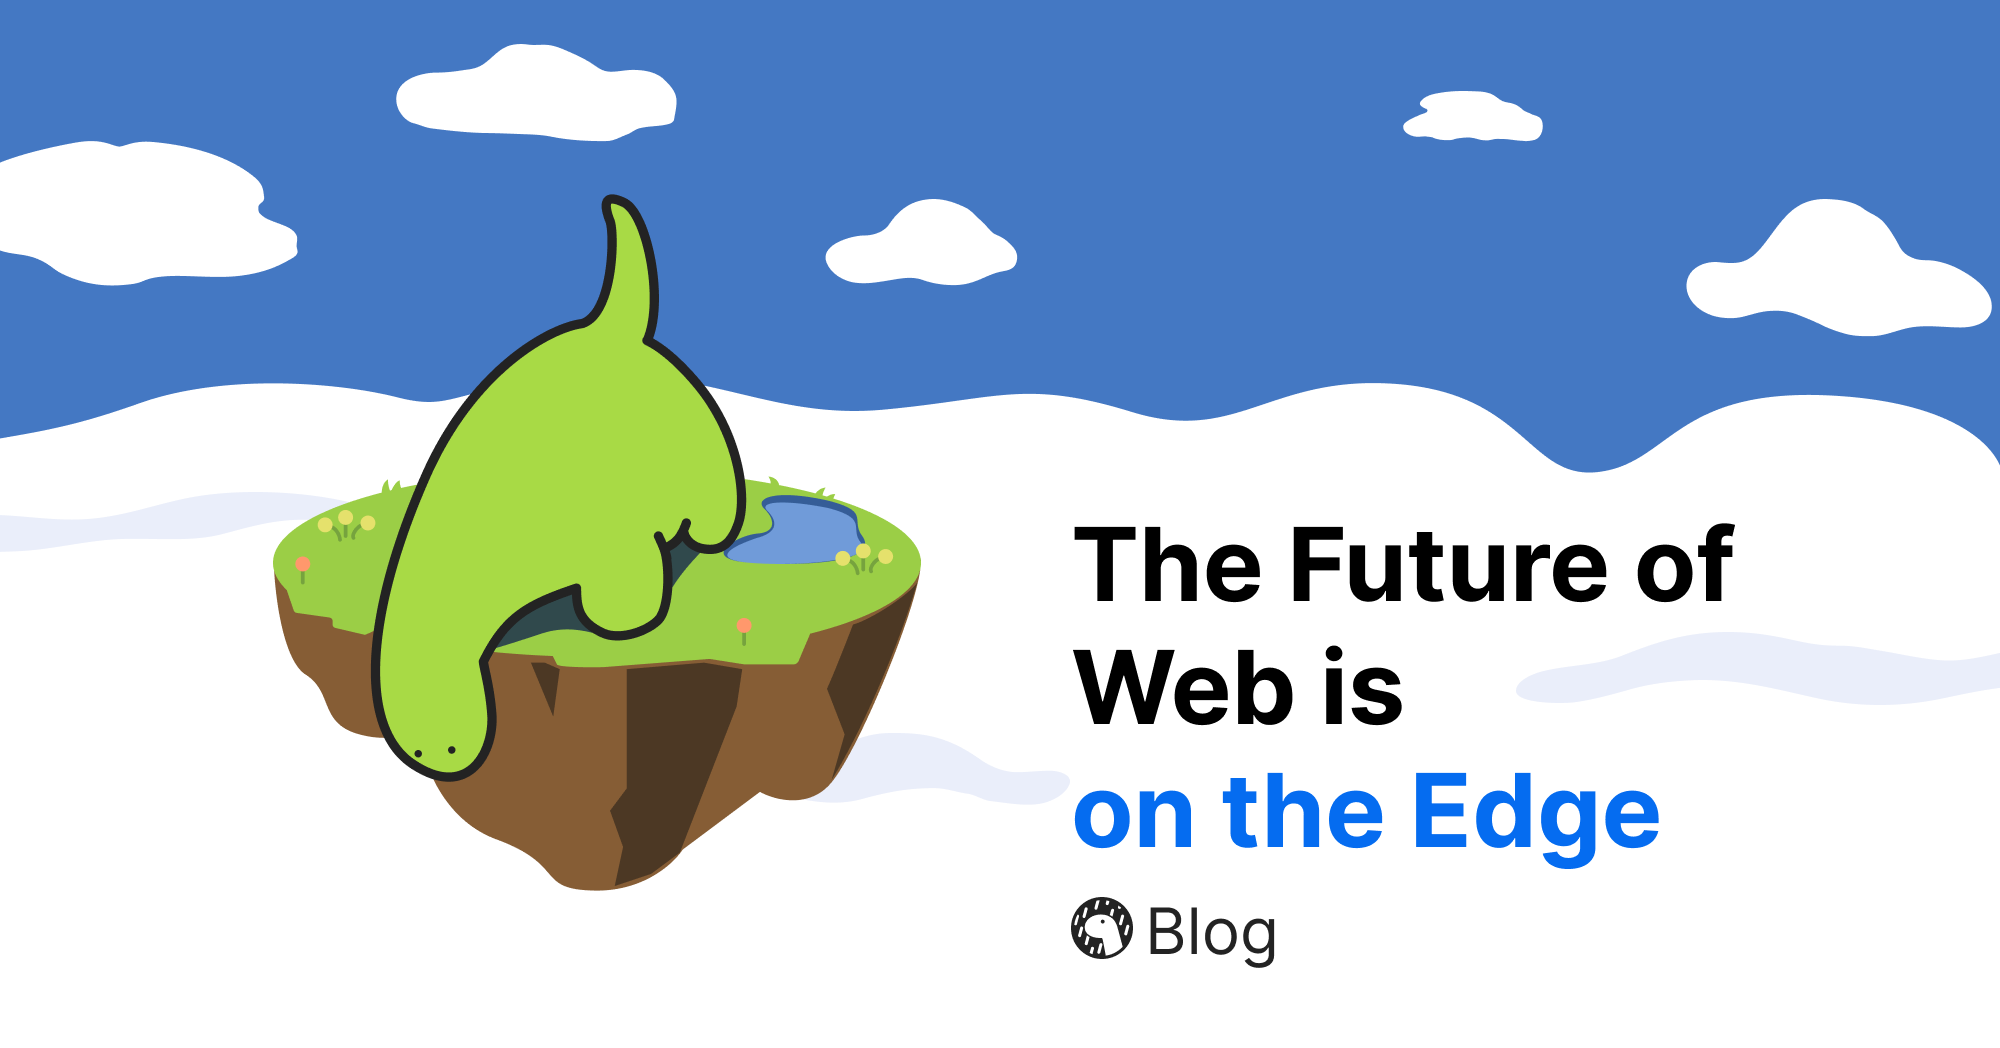 The Future of the Web is on the Edge